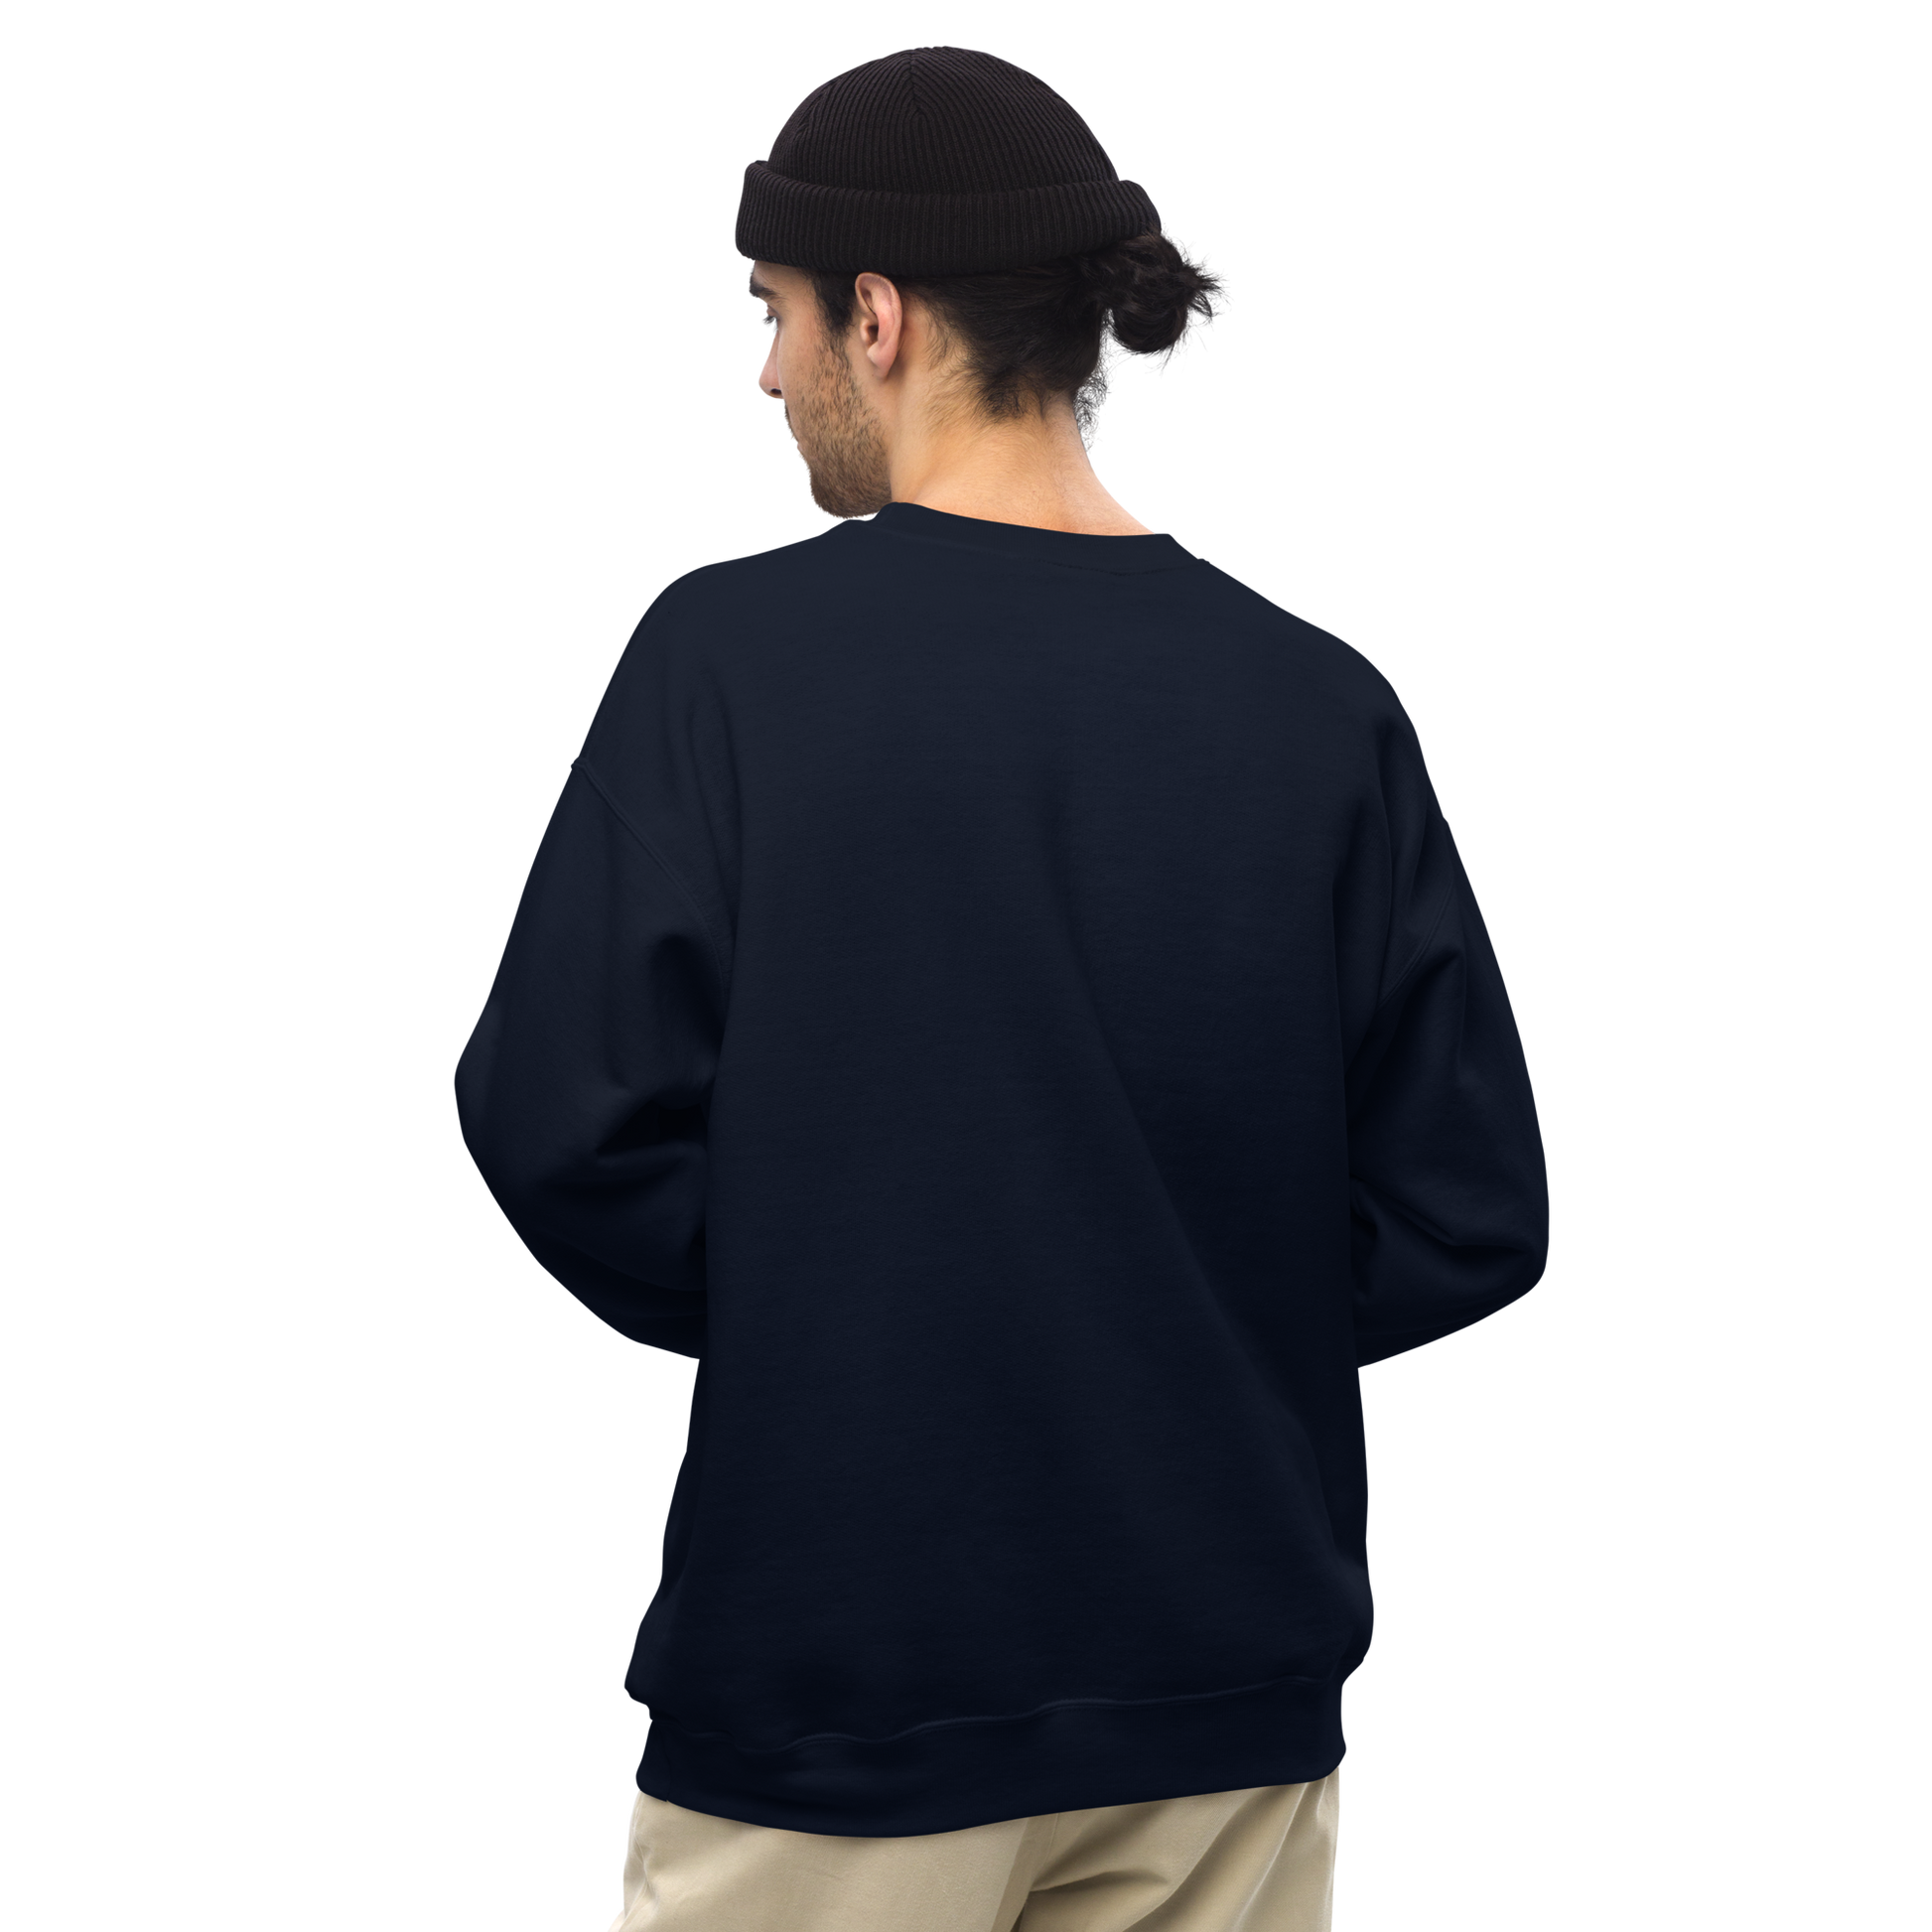 Back of a man wearing a Navy Shiba Inu Sweatshirt featuring the Inu-Credible graphic on the chest - Funny Graphic Shiba Inu Sweatshirts - Boozy Fox